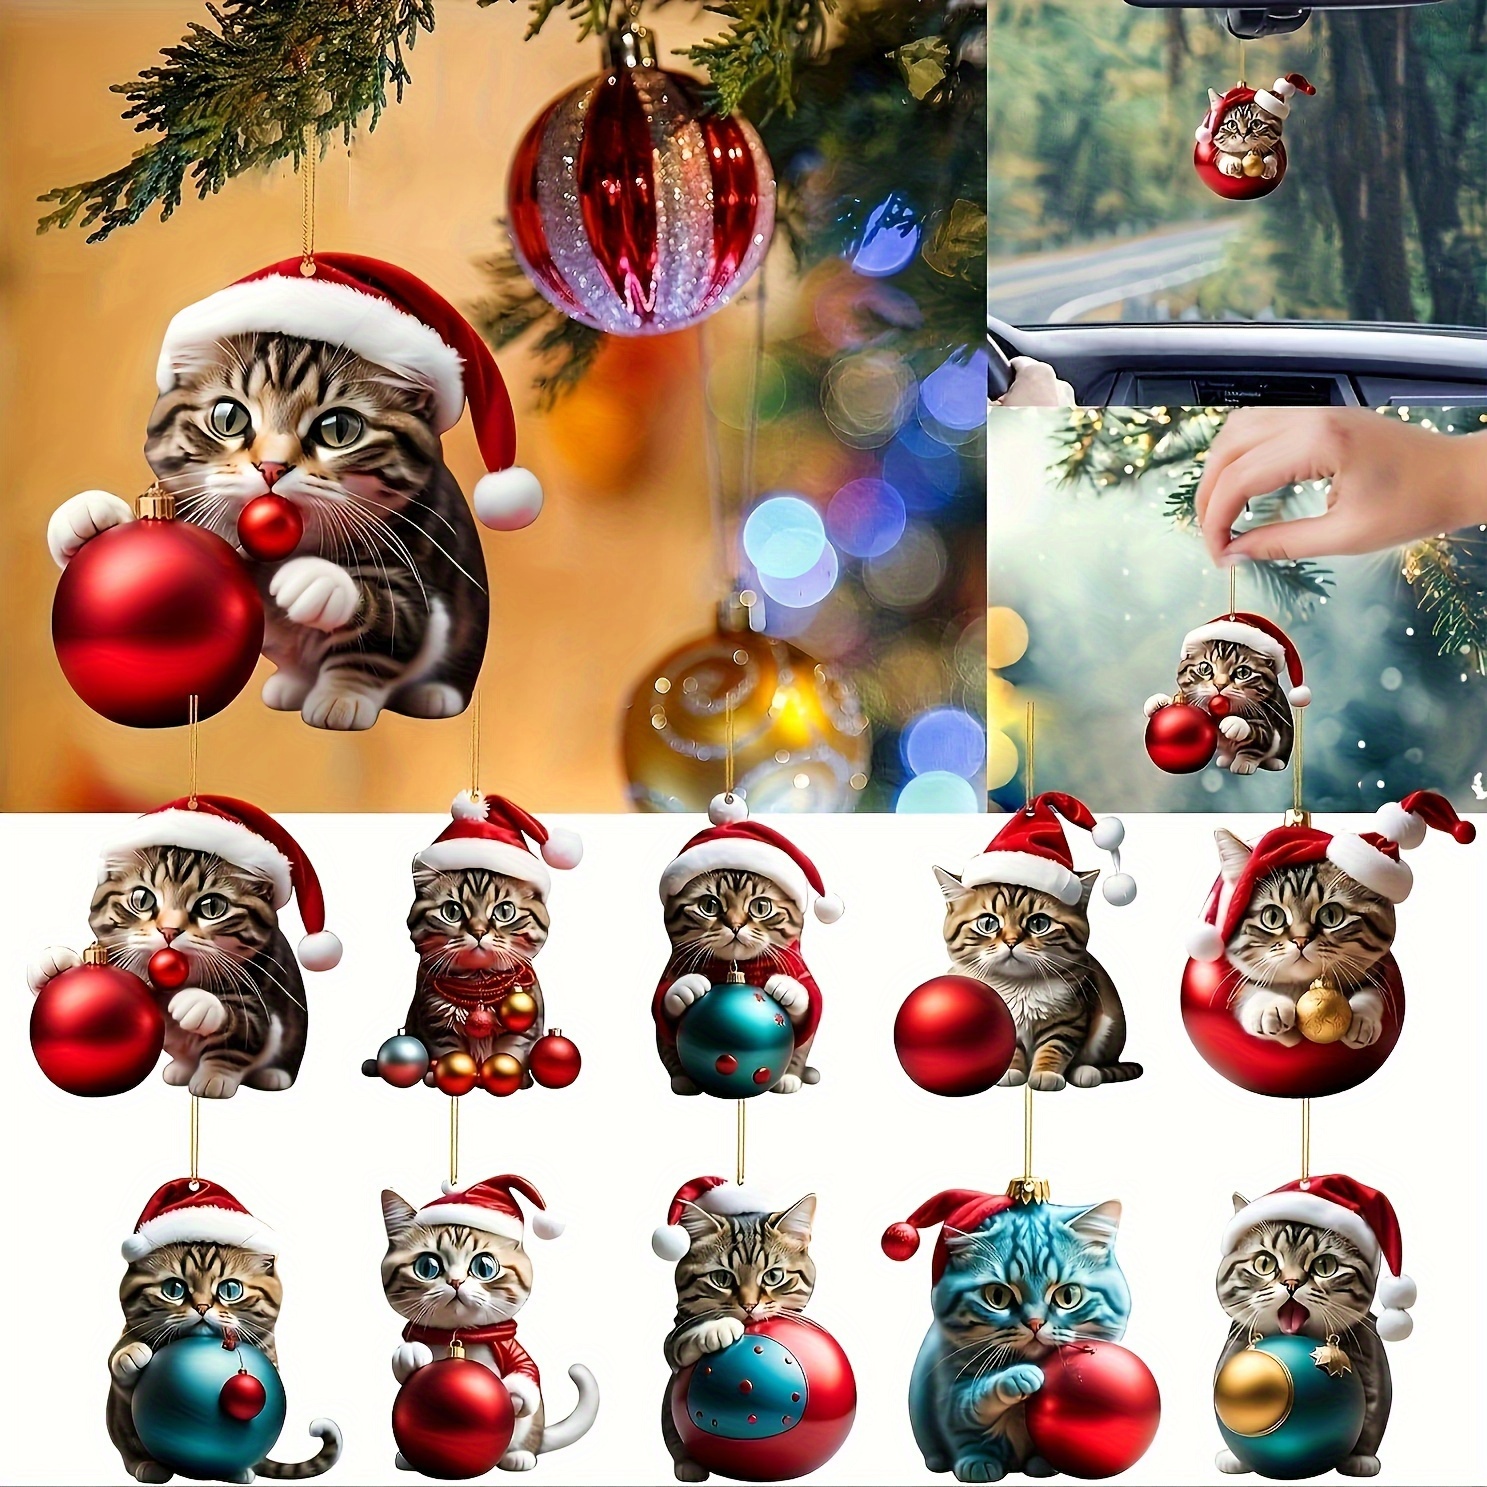 

10pc Christmas Cat Acrylic Ornaments Set - Plastic Santa Hat Kitty Hanging Decorations For Christmas Tree, Car Rearview Mirror, Keychain, Home And Party Decor